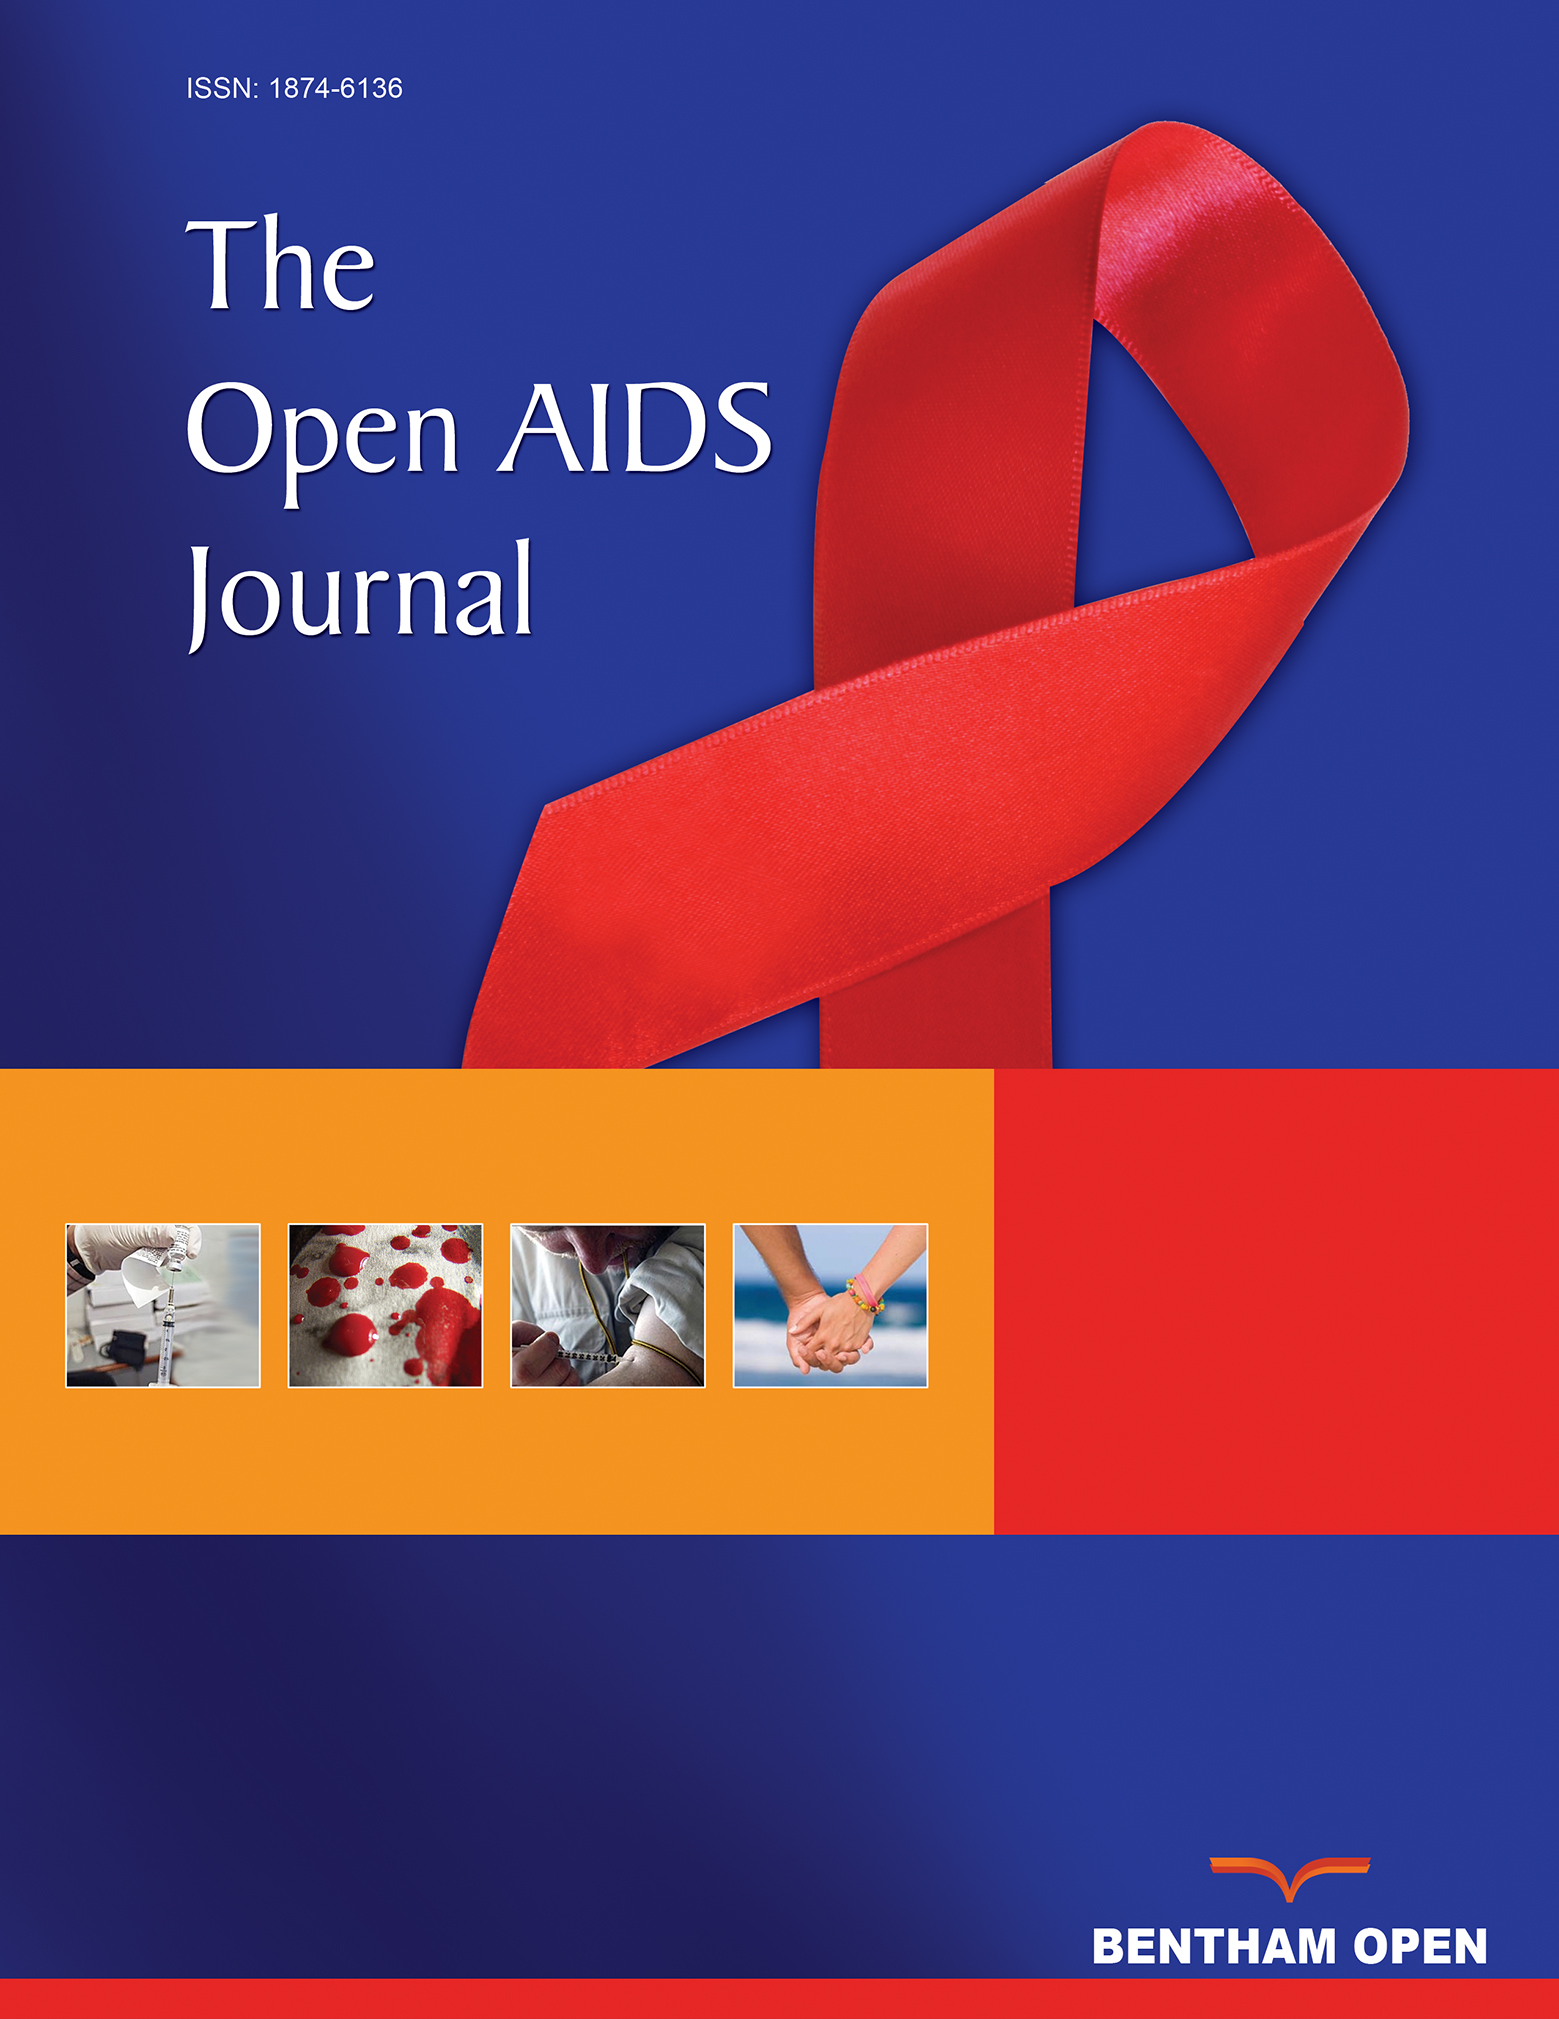 The Open AIDS Journal